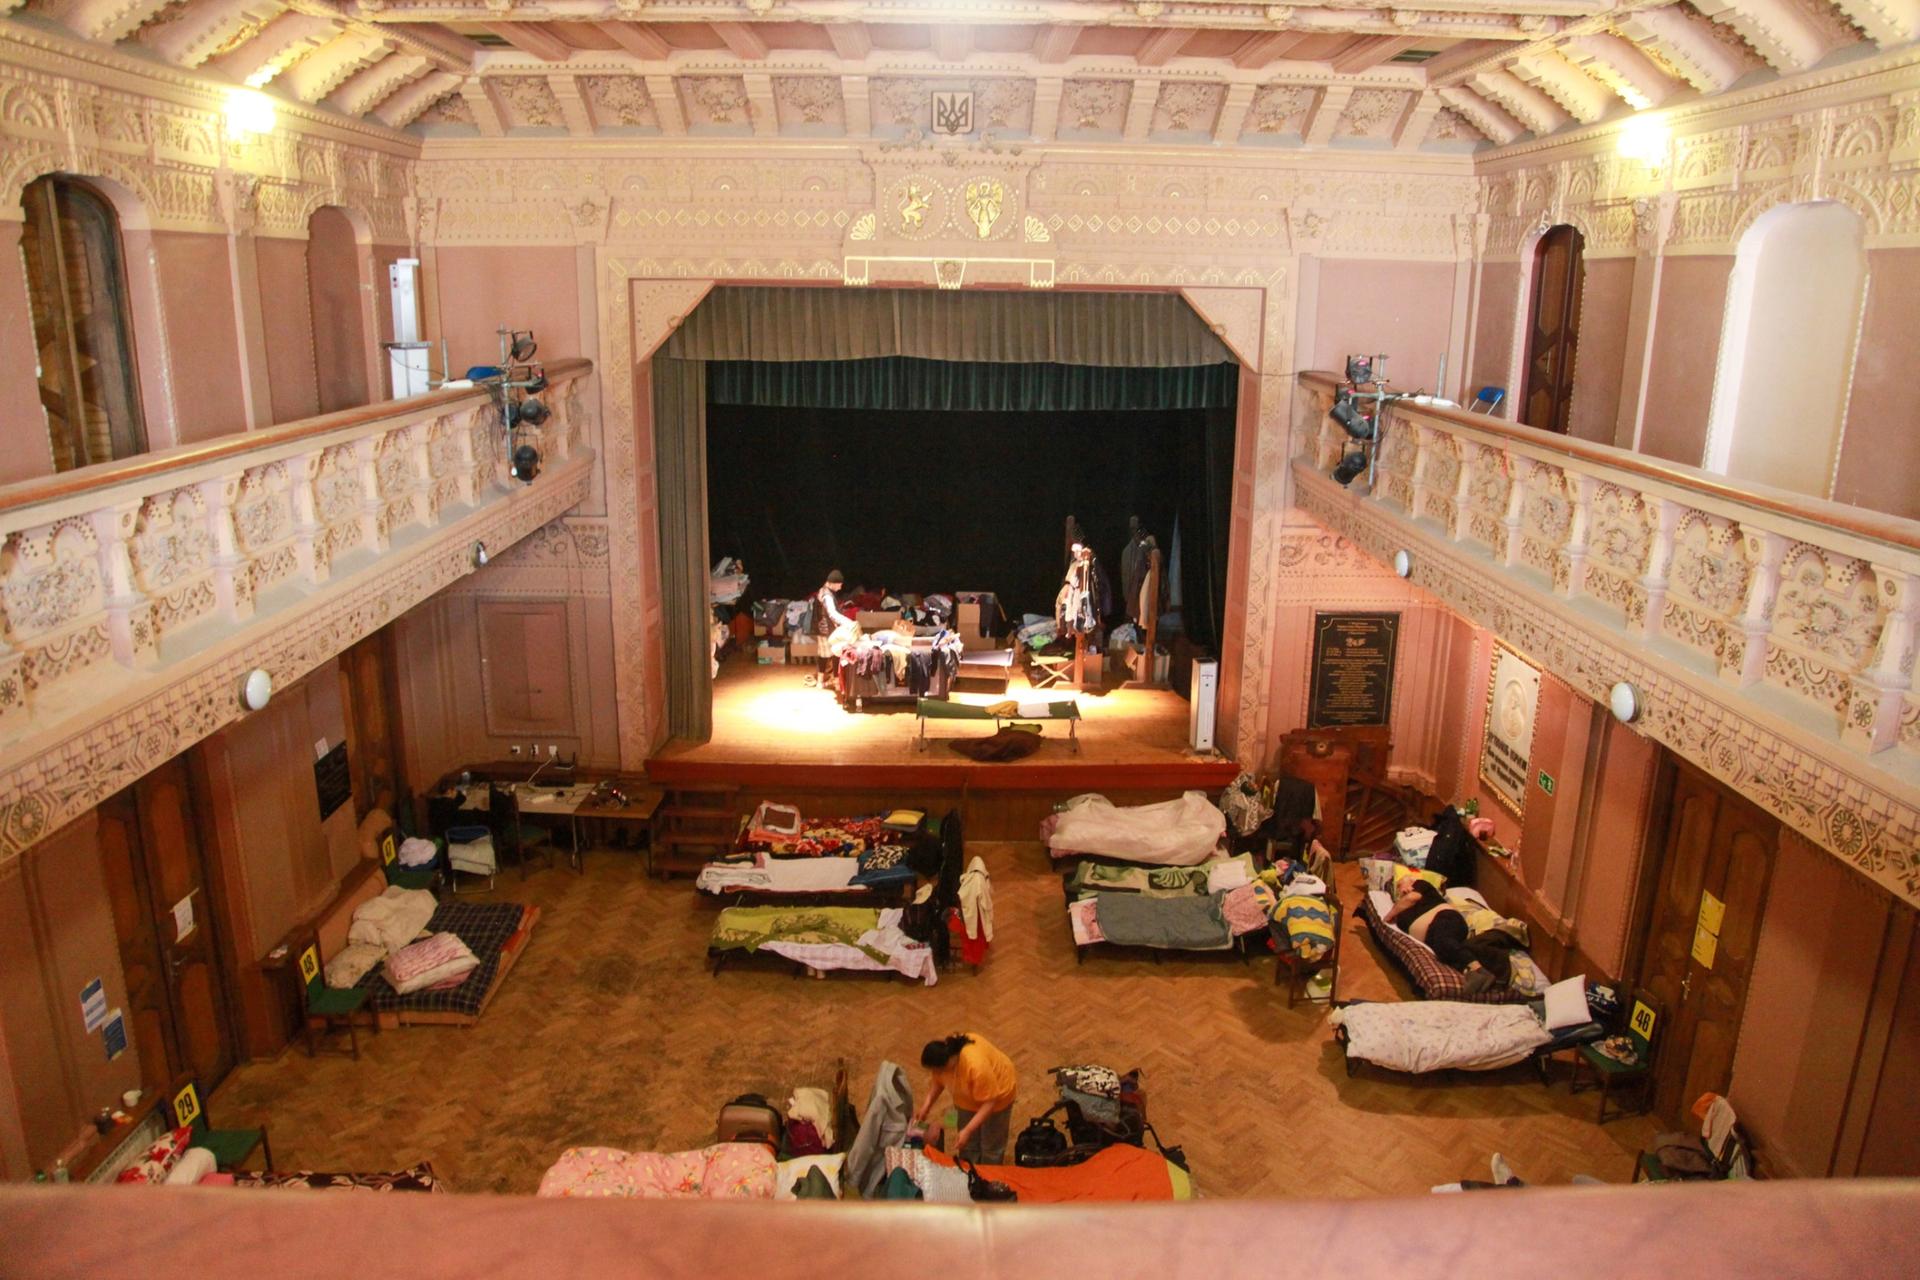 A temporary shelter in an old theater space houses Ukrainian refugees transiting through Przemysl, about 15 minutes from the Ukraine border. 